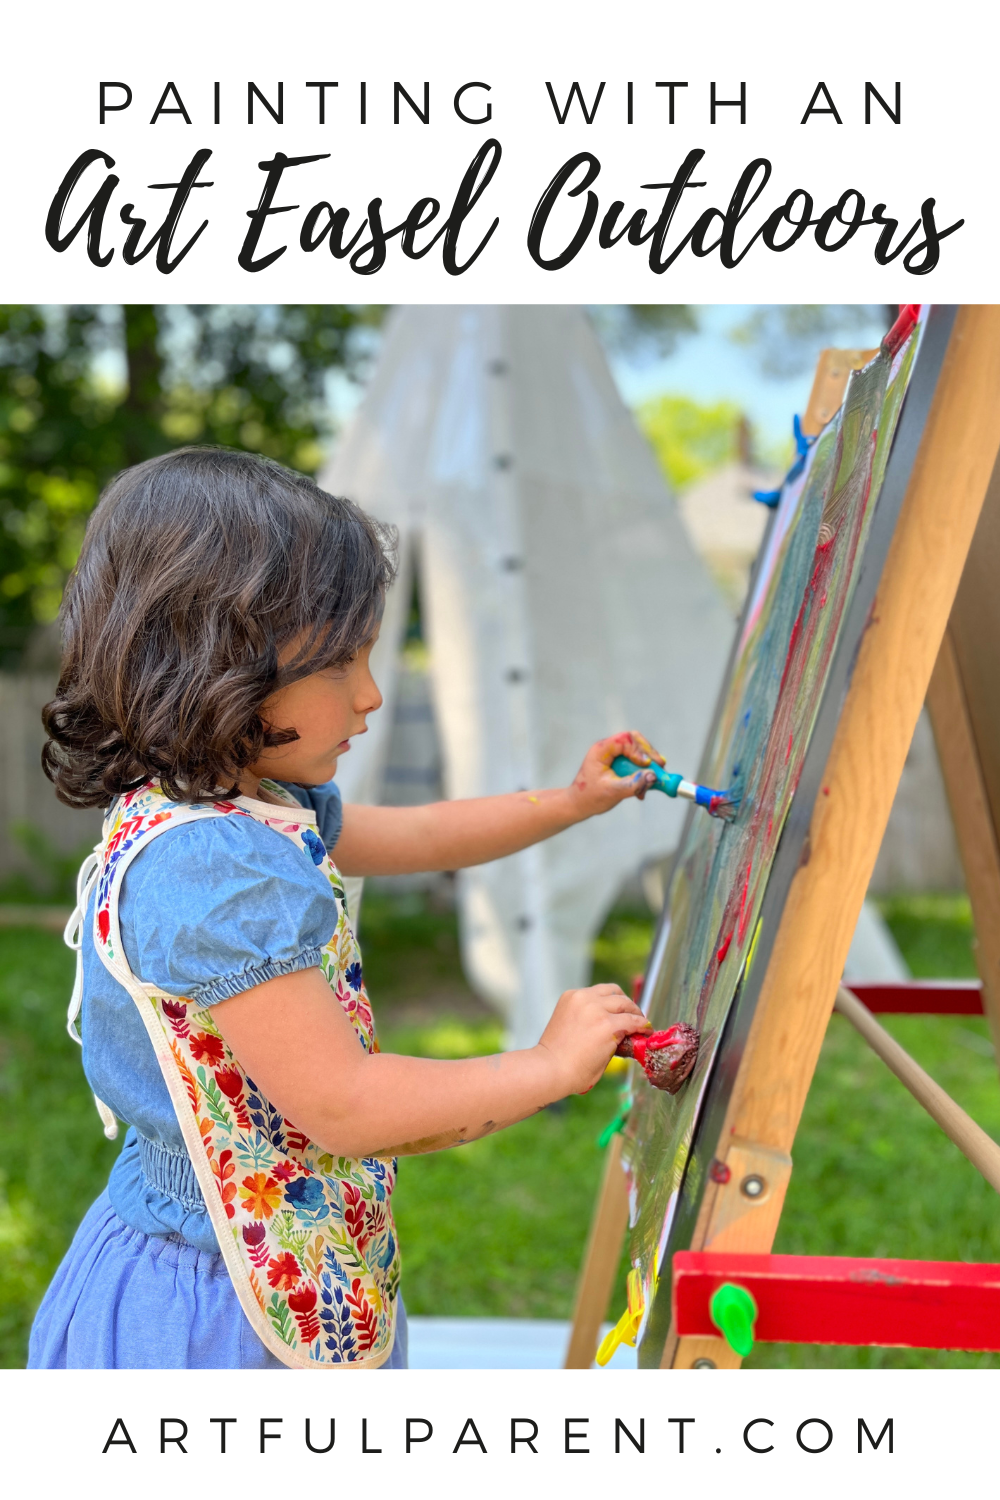 Painting with a Kids Art Easel Outdoors